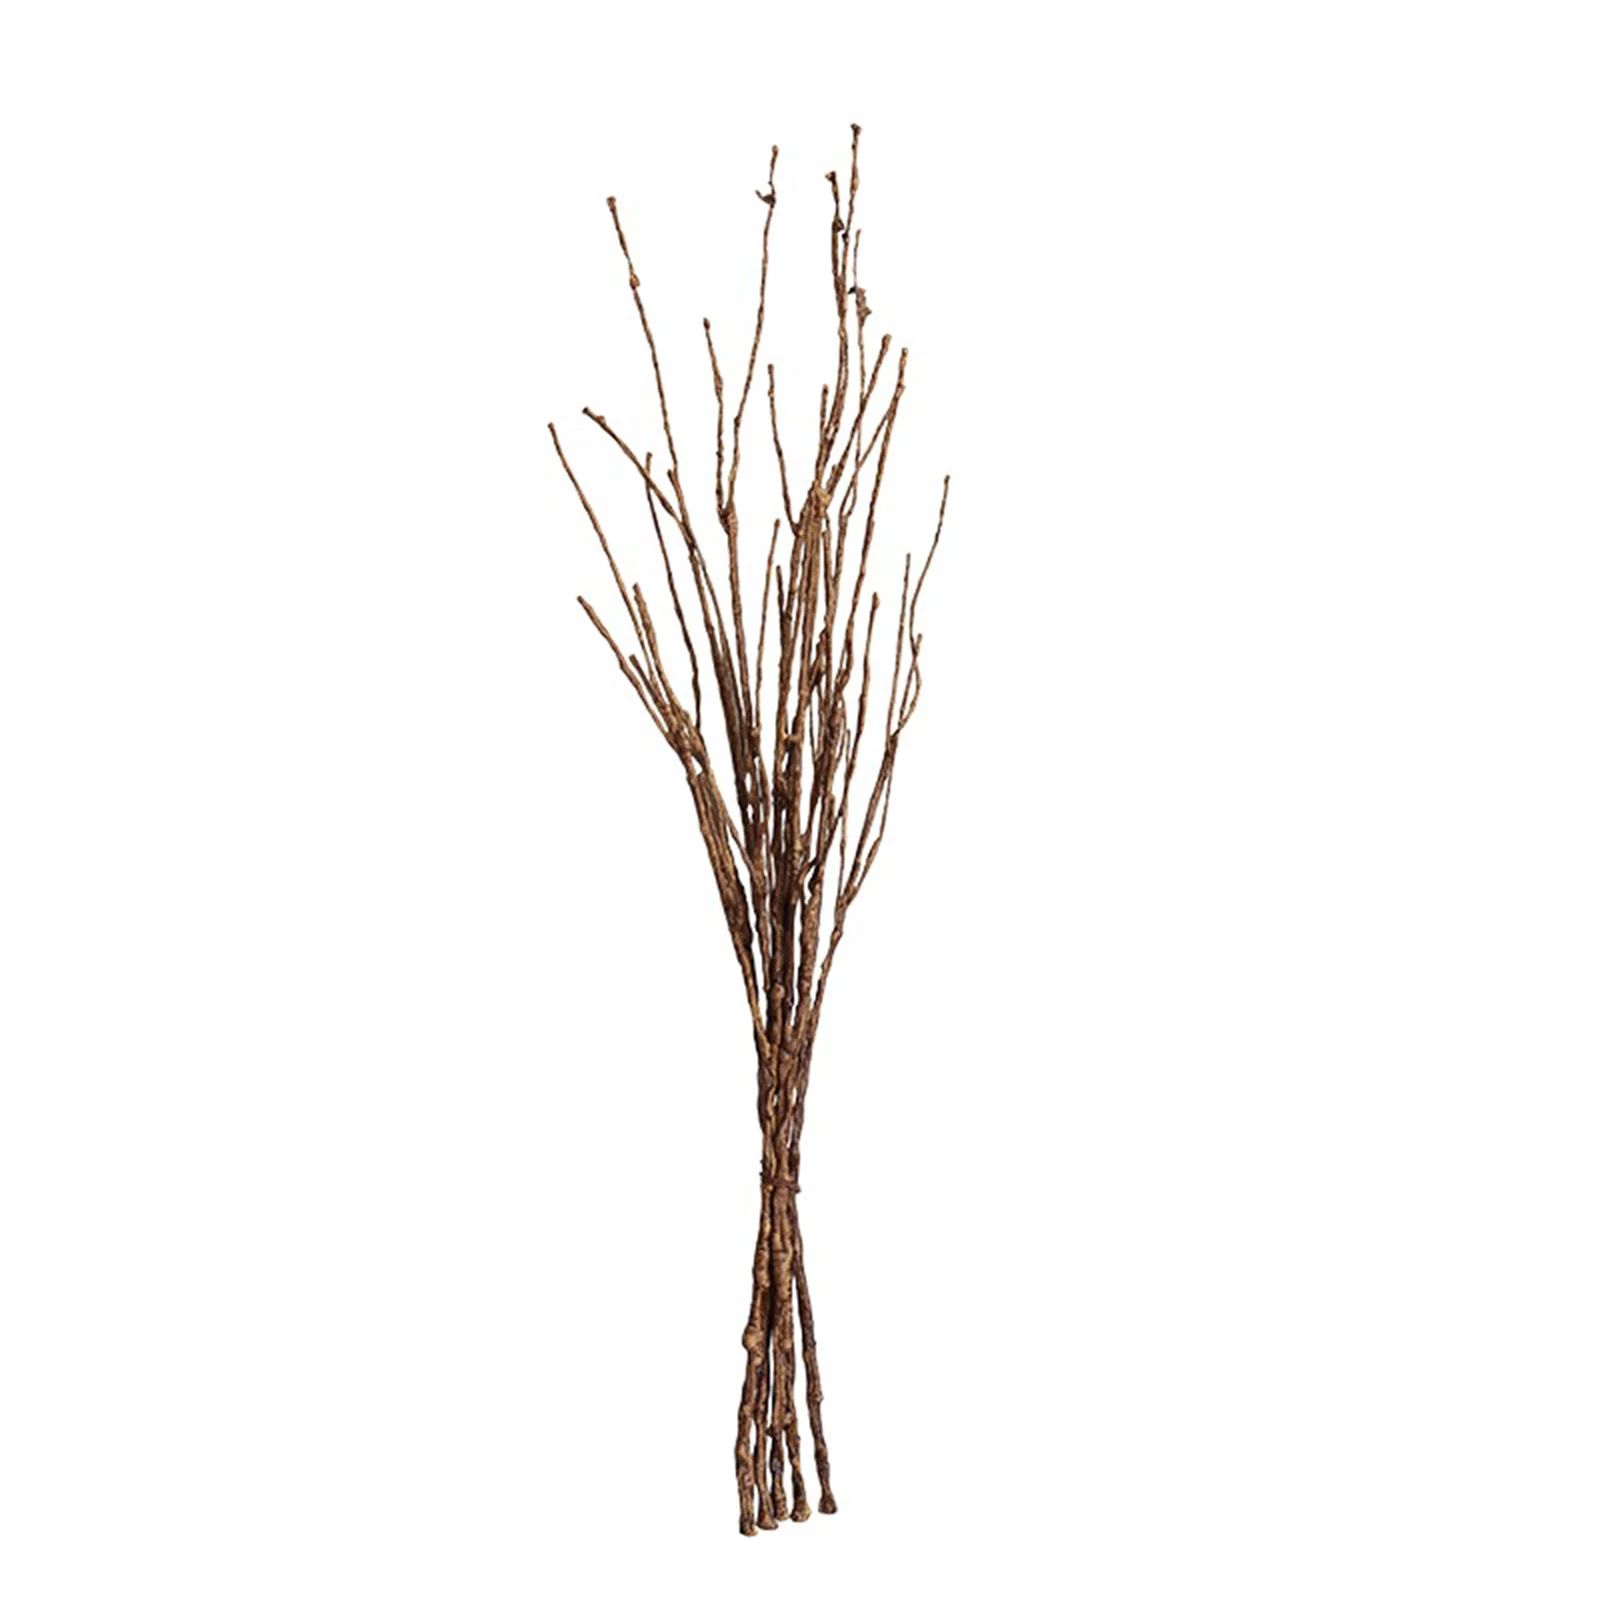 Lifelike Dry Willow Branches Bendable Iron Wires Artificial Floral Flower Stub Stem DIY Craft Wed... | Walmart (US)